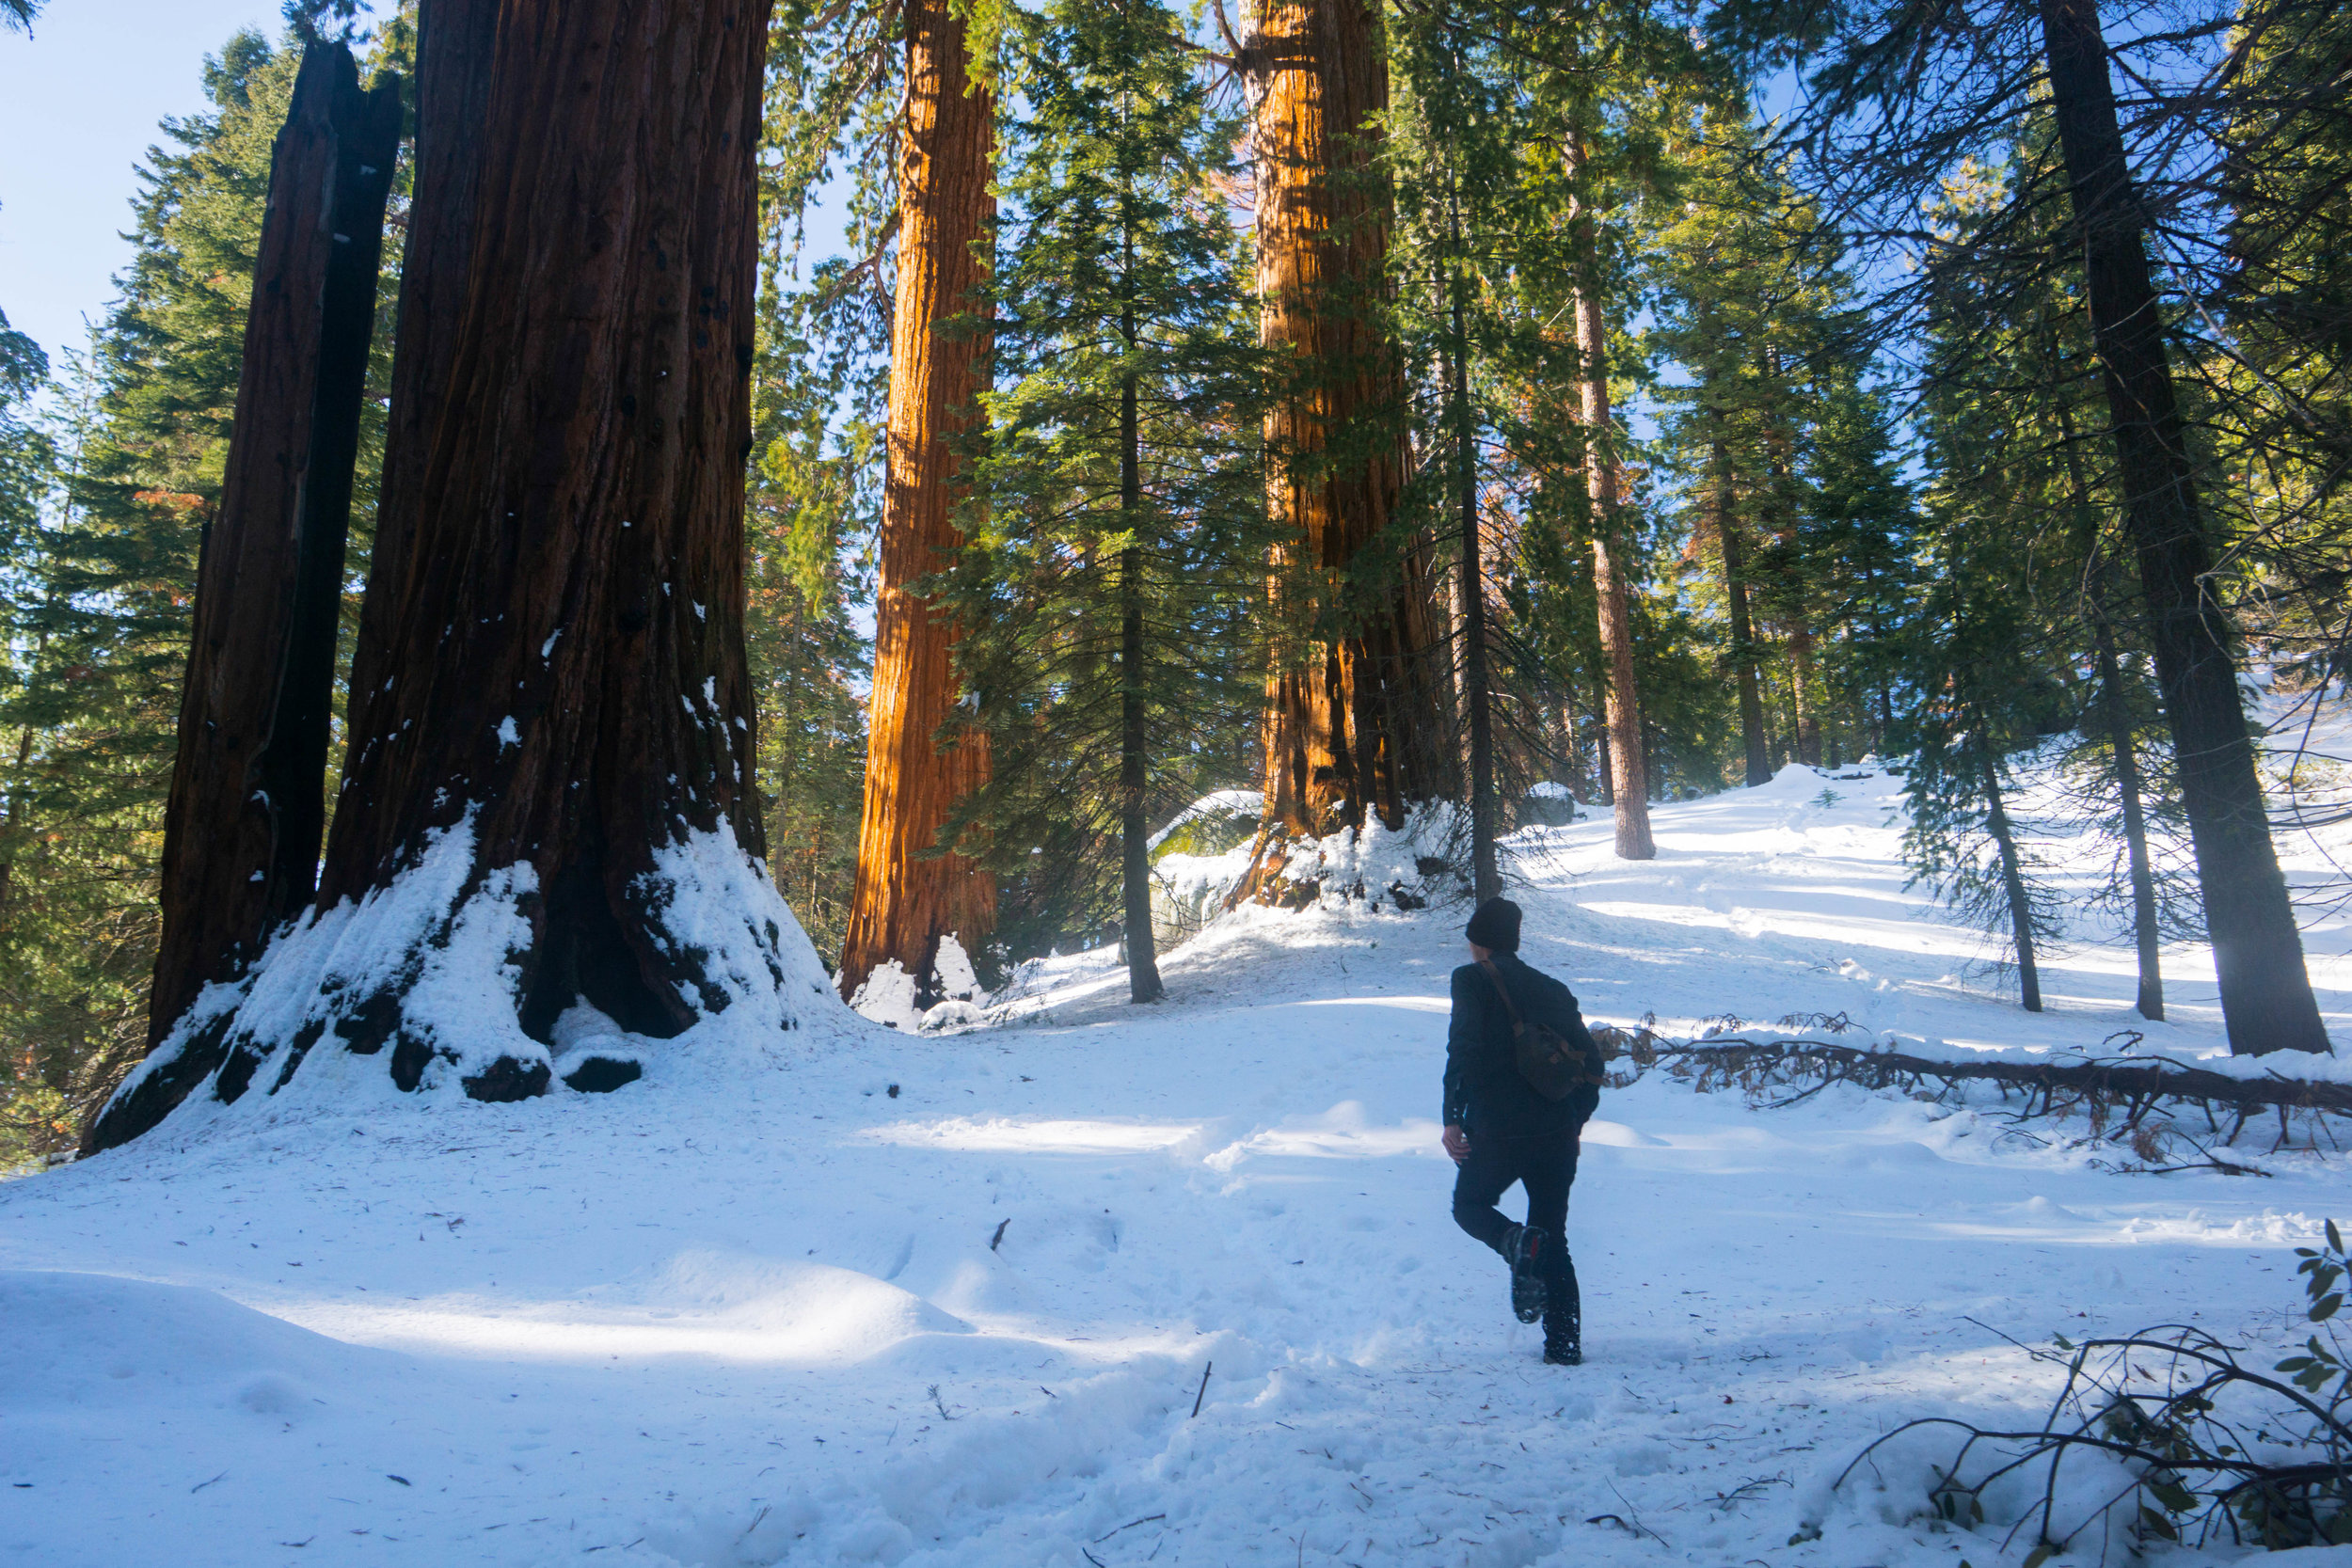 During winter, Grant Grove is transformed as the deep red bark of the trees contrasts against the powdery white of fresh snow.